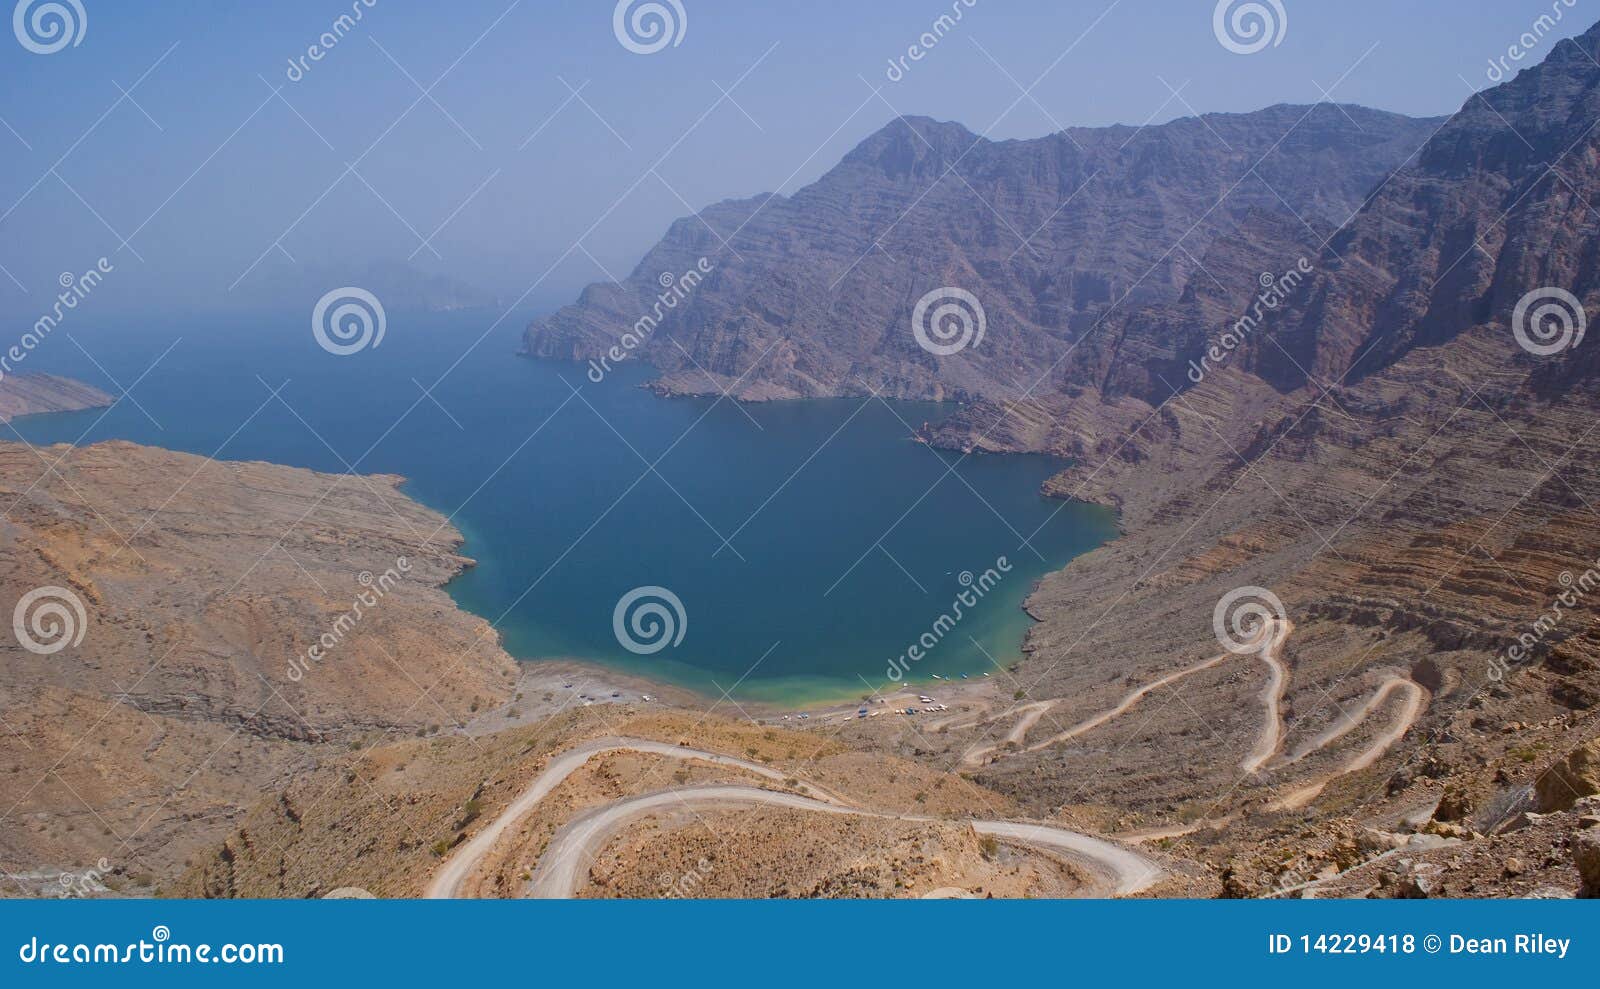 secluded beach in the oman mountains